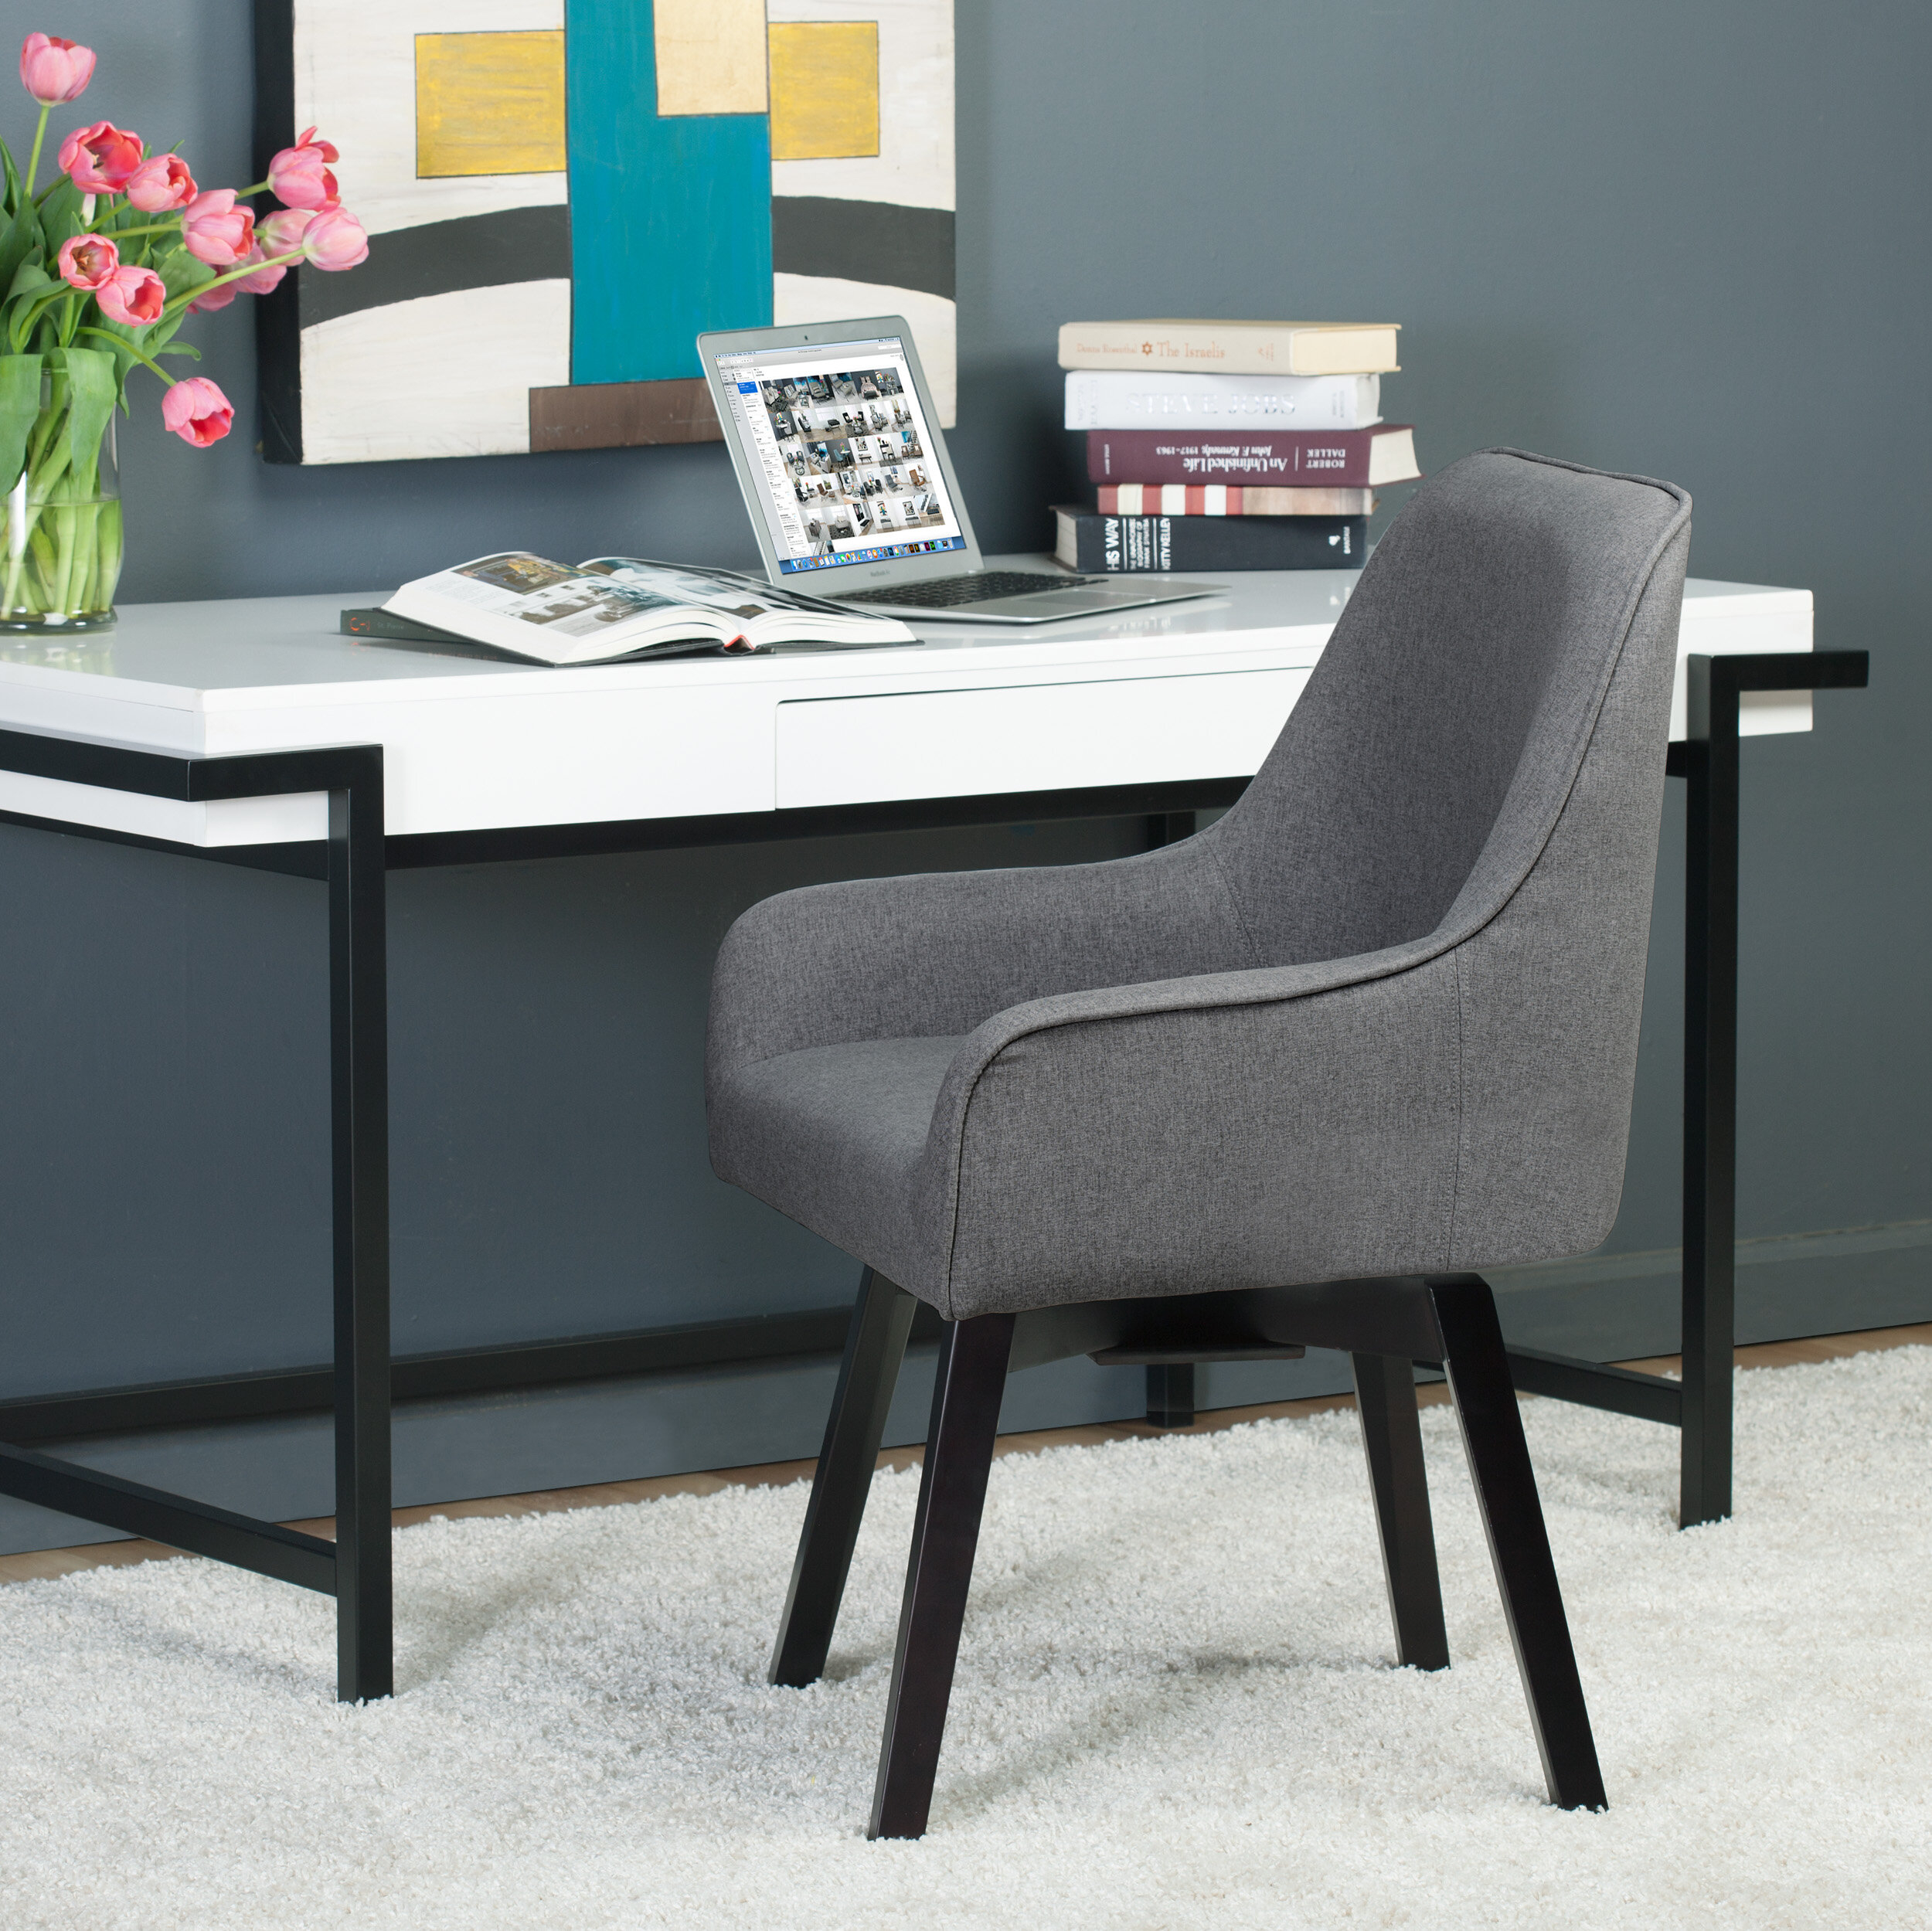 A Desk Chair Without Wheels, Upholstered Desk Chair Without Wheels